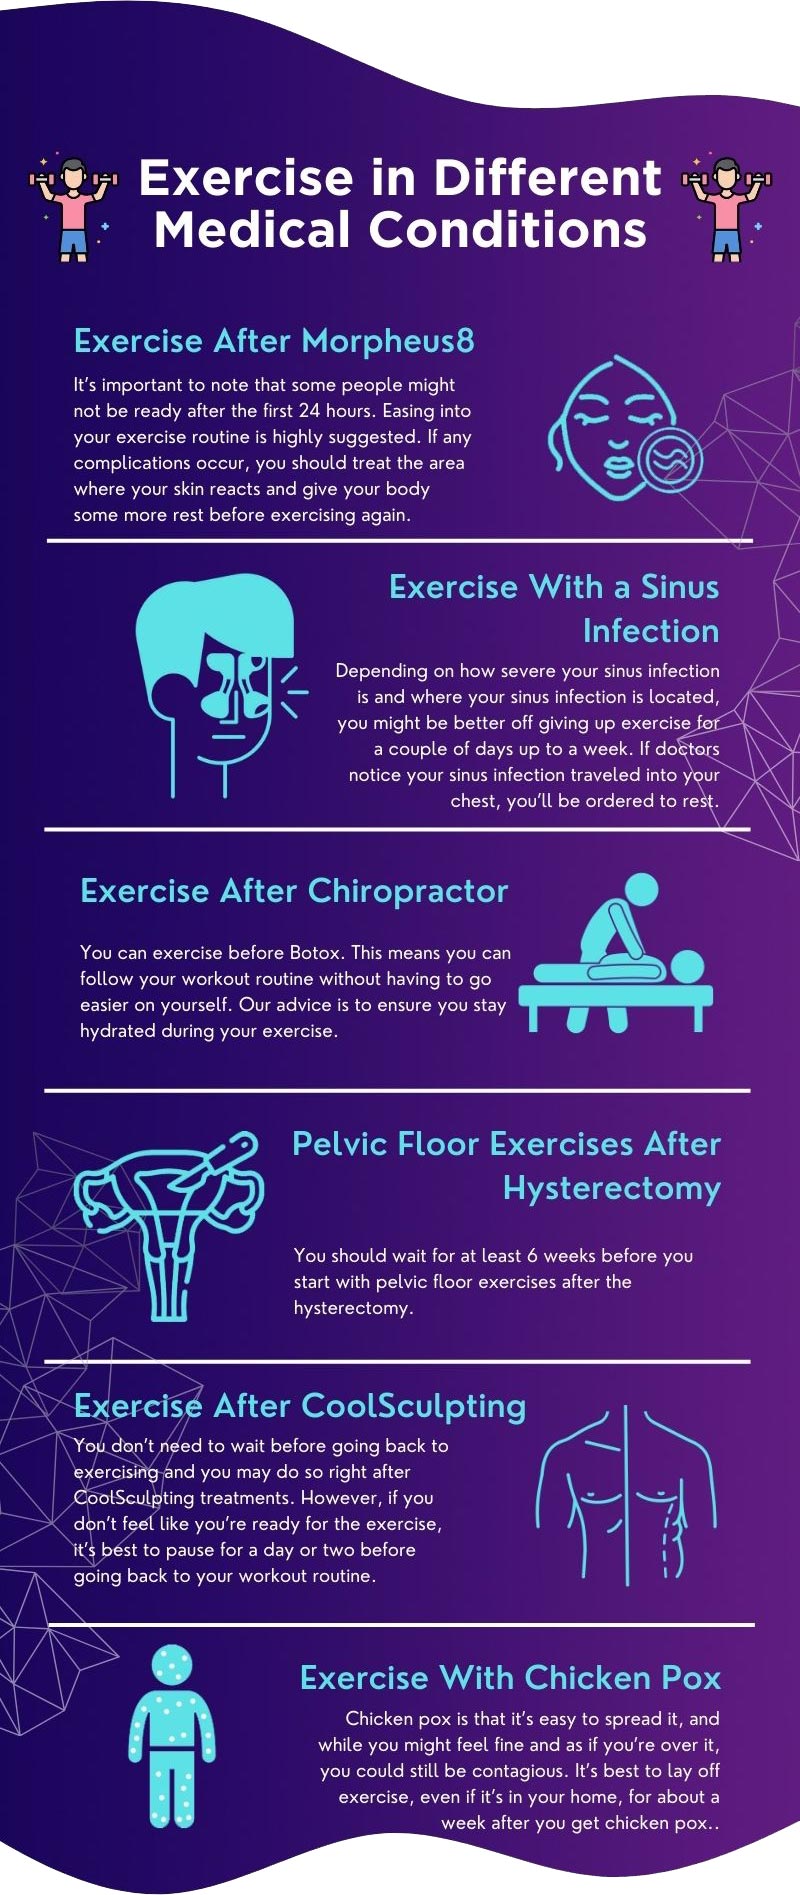 Exercise in Different Medical Conditions